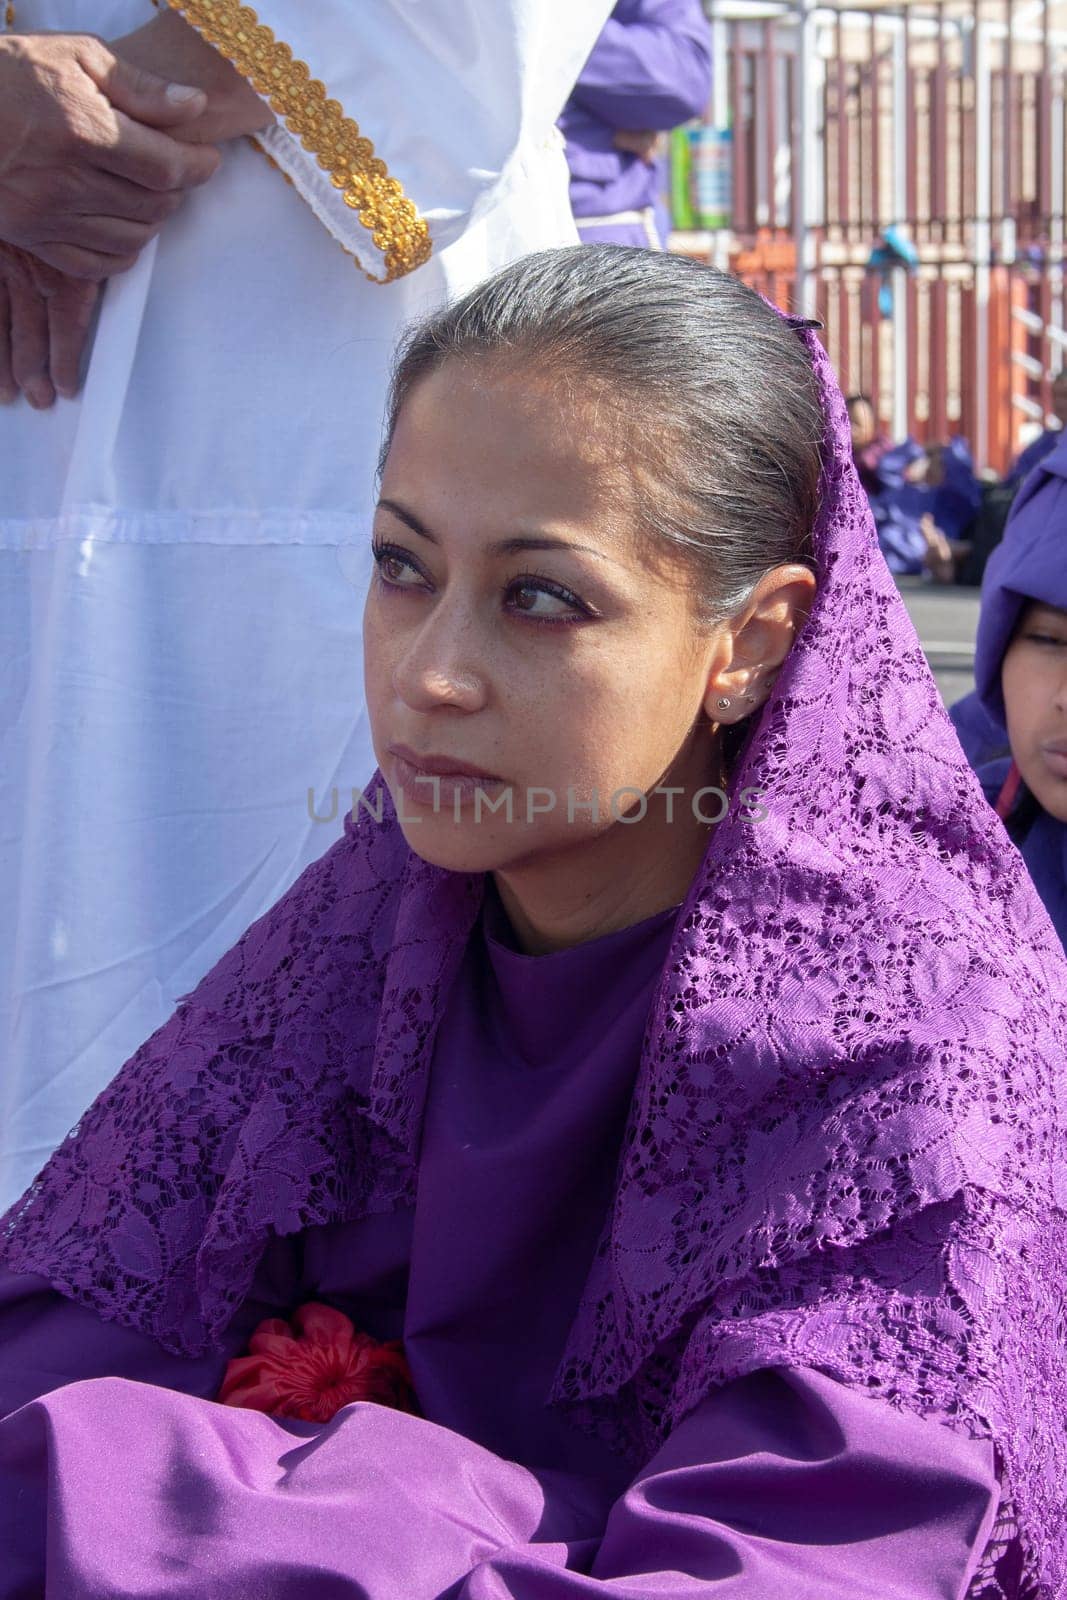 Nazarene woman in a Holy Week procession sitting and tired by Raulmartin